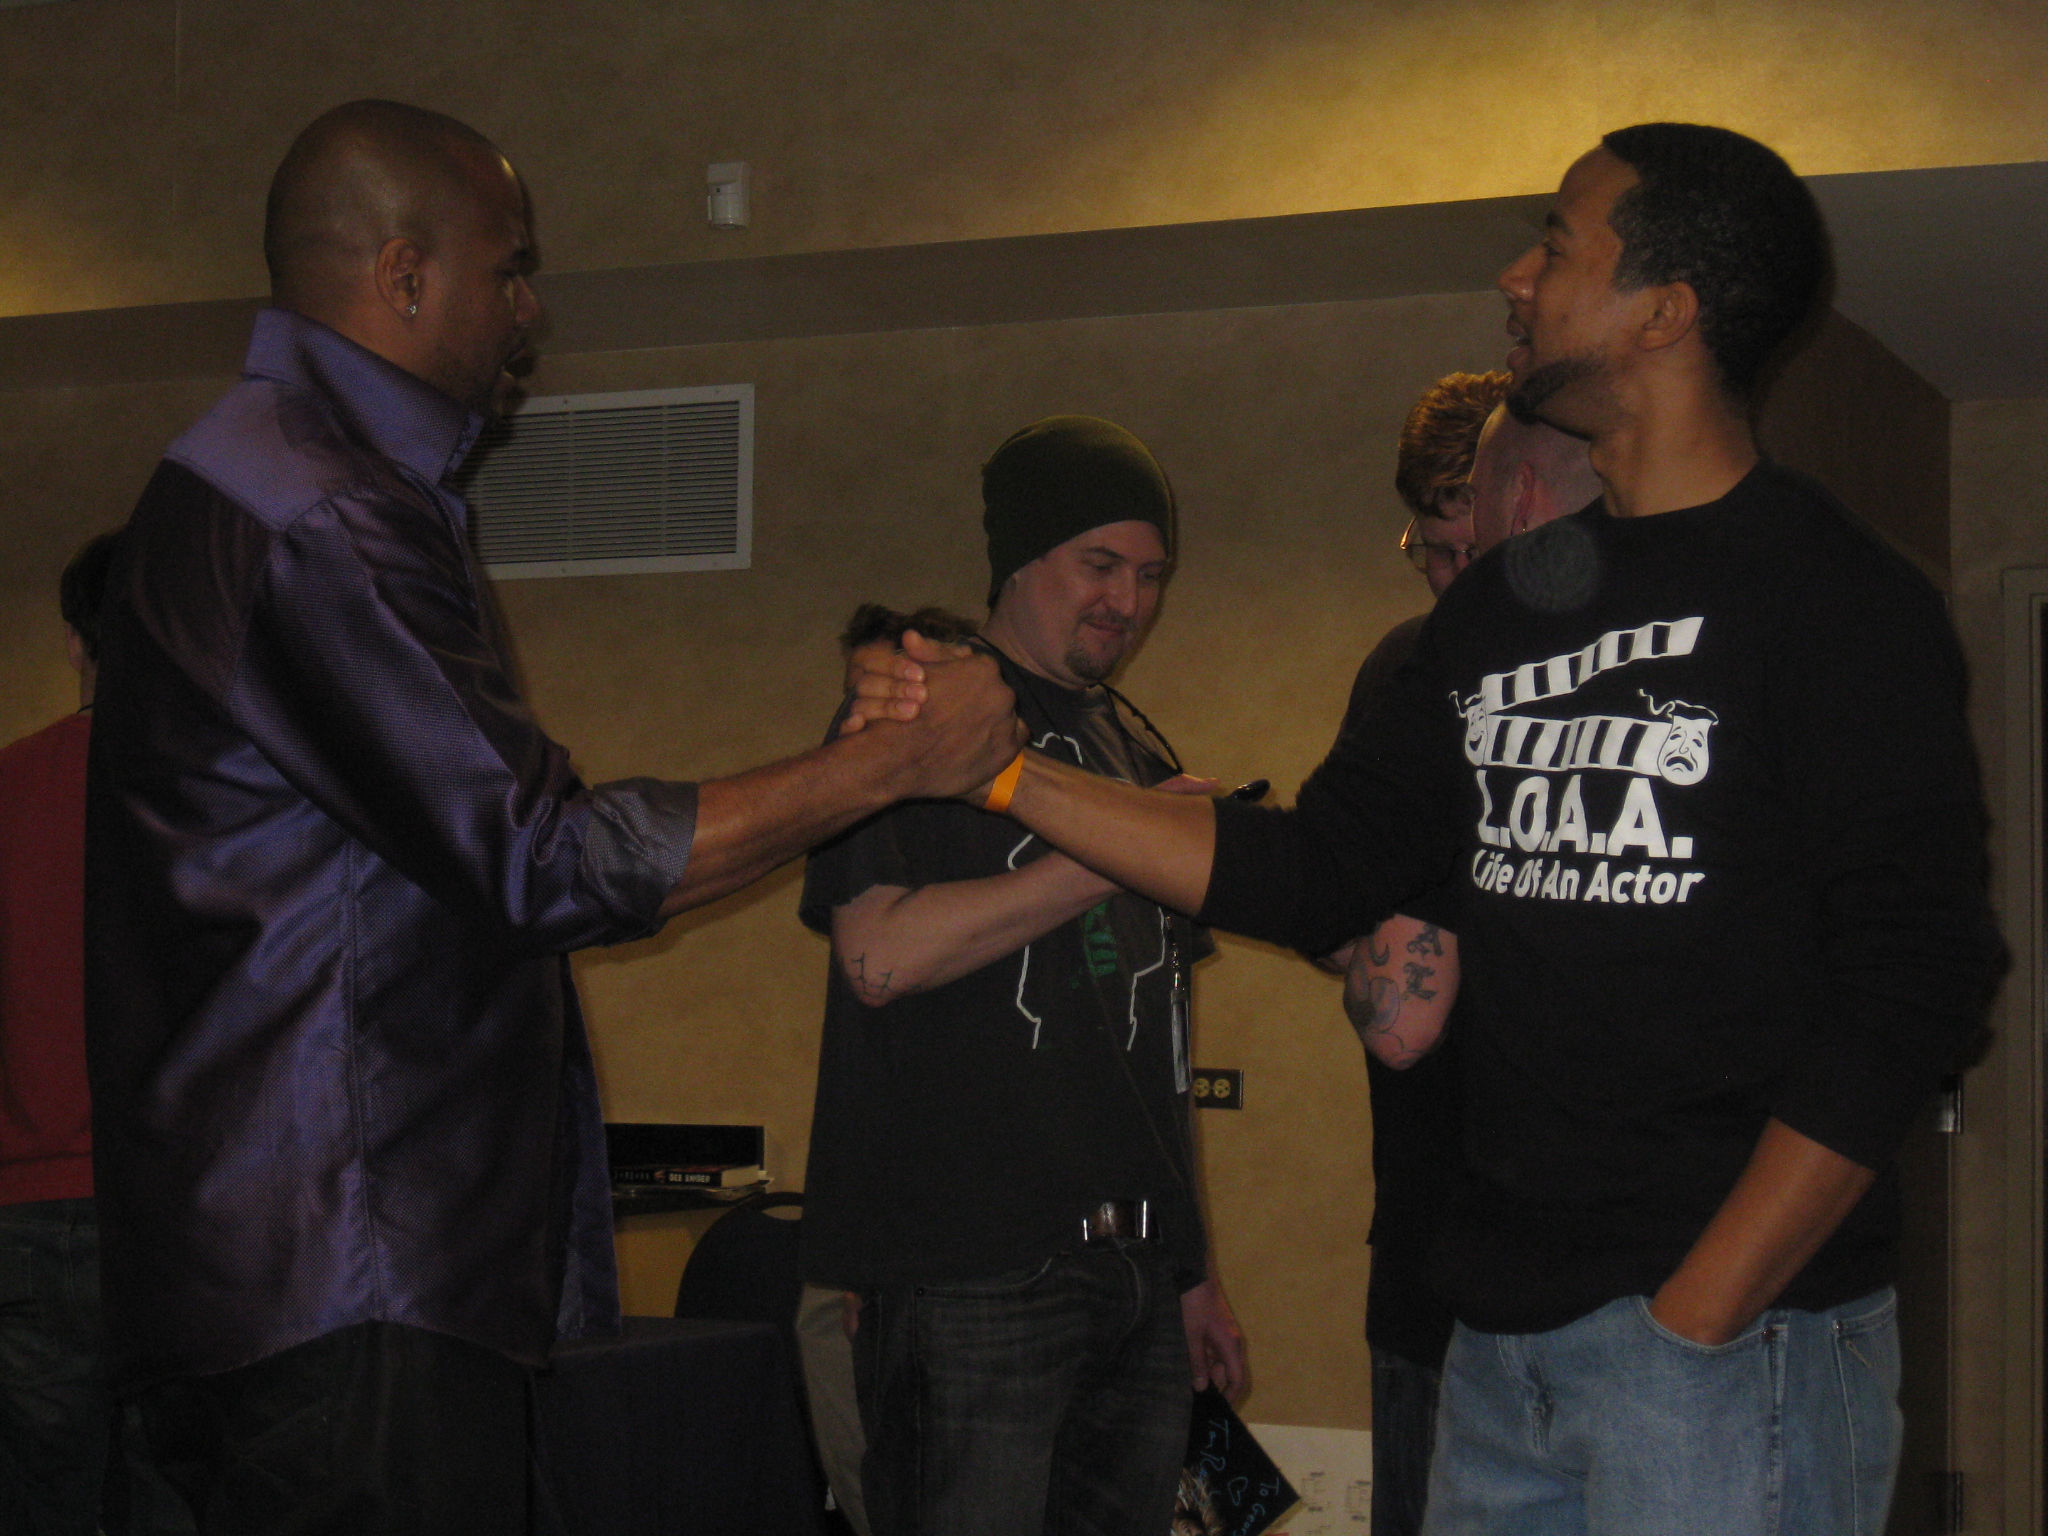 Chris Greene with actor Vincent M. Ward at the Days of the Dead convention in Atlanta, GA 2014